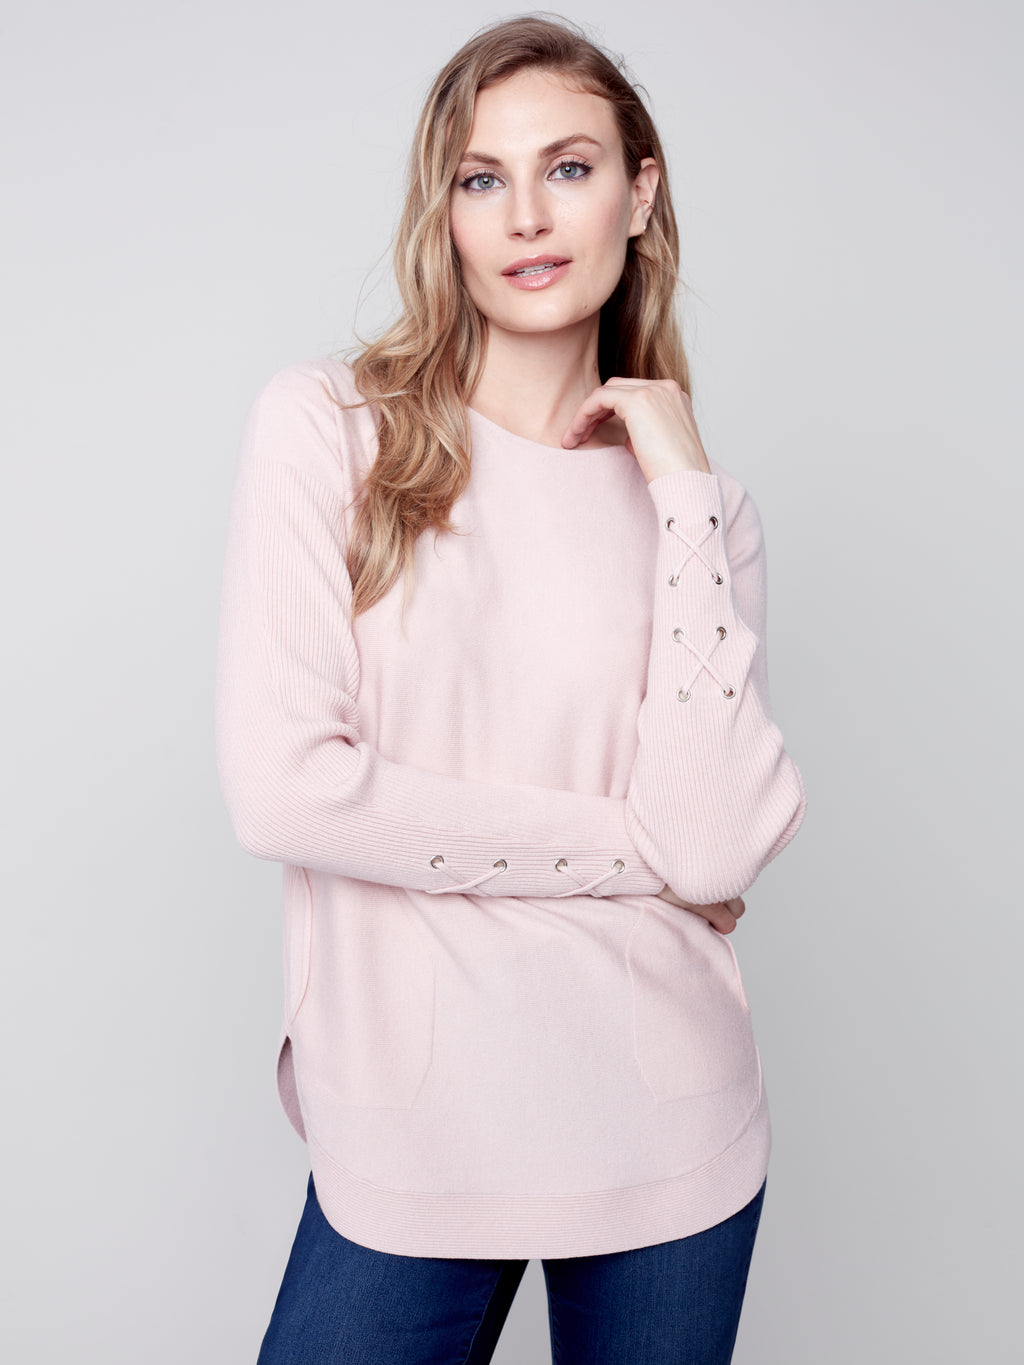 Charlie B Sweater with criss cross detailed